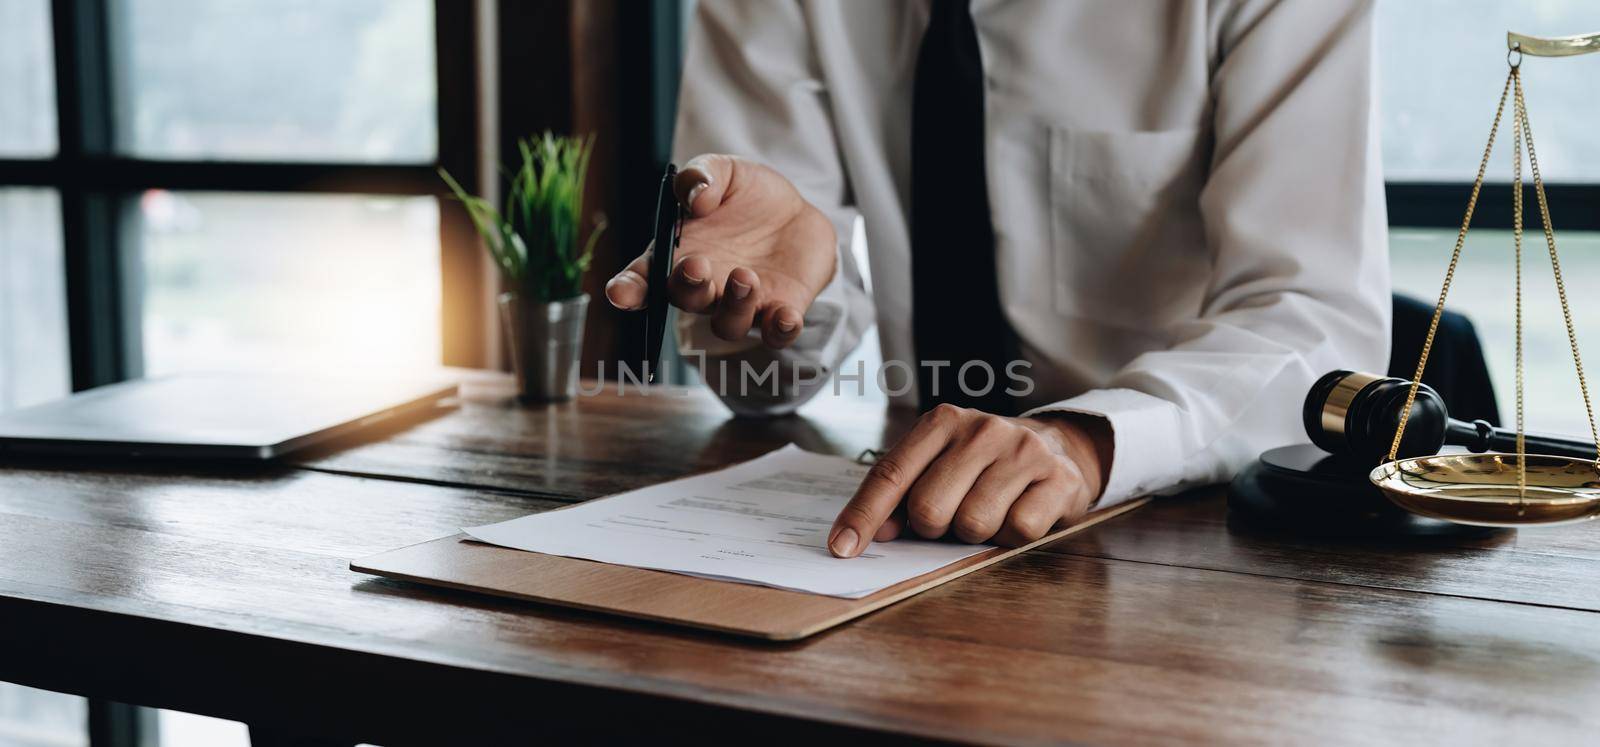 Close up business lawyer man reaching out sheet with contract agreement proposing to sign. individual who owns the business sign personally,director of the company, solicitor. by nateemee